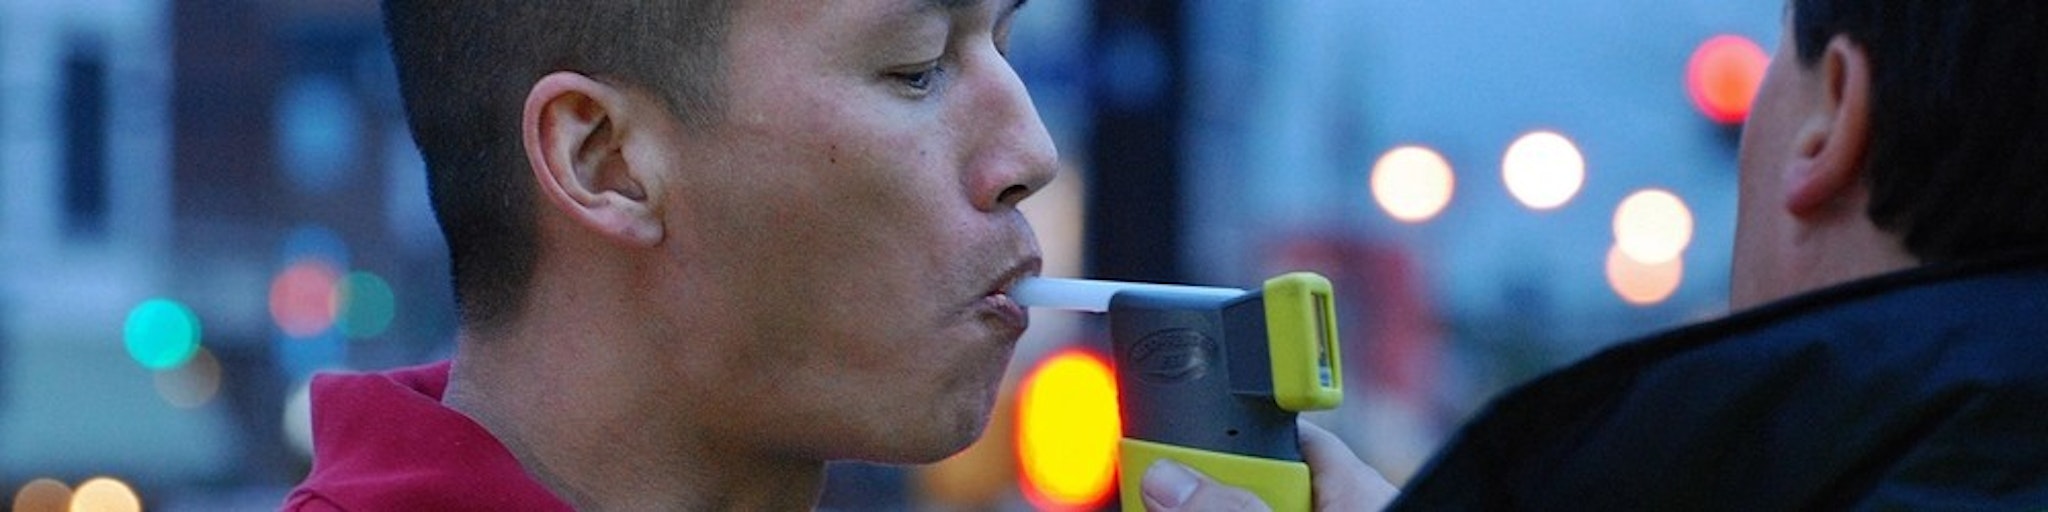 Cover Image for Is It Bad Advice To Refuse A Breathalyzer?